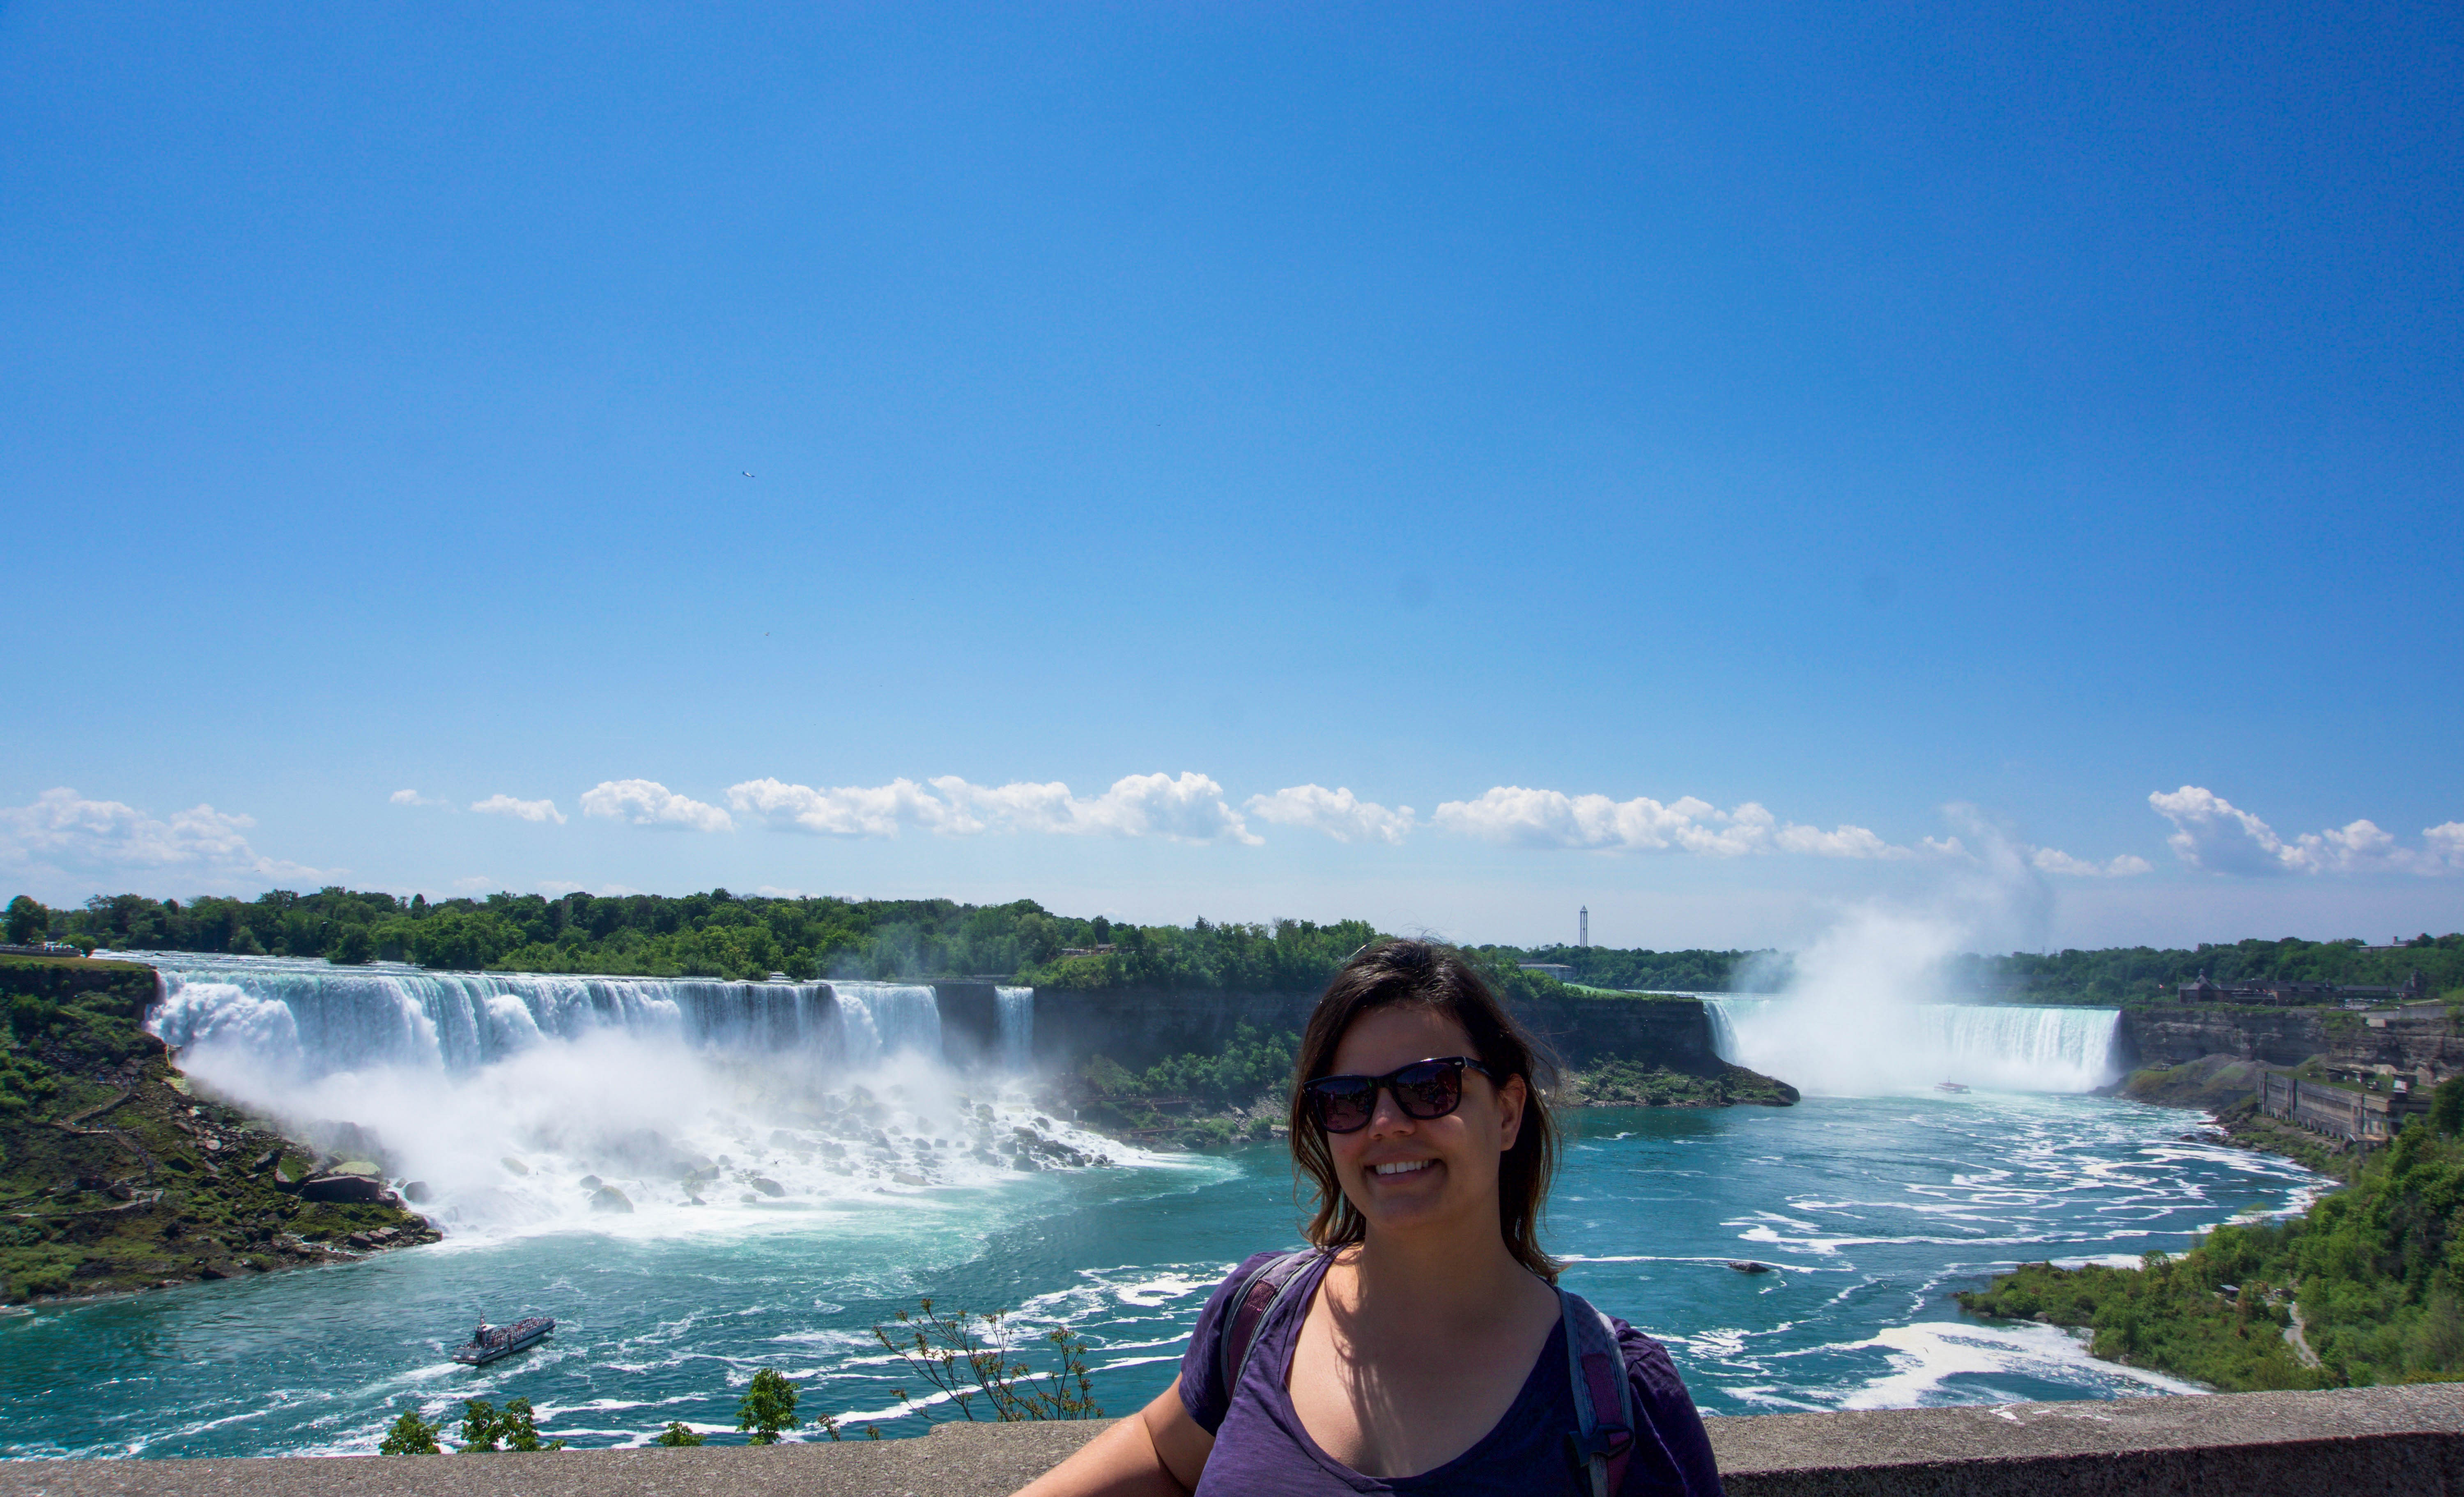 Enjoying the views of the falls from Canada